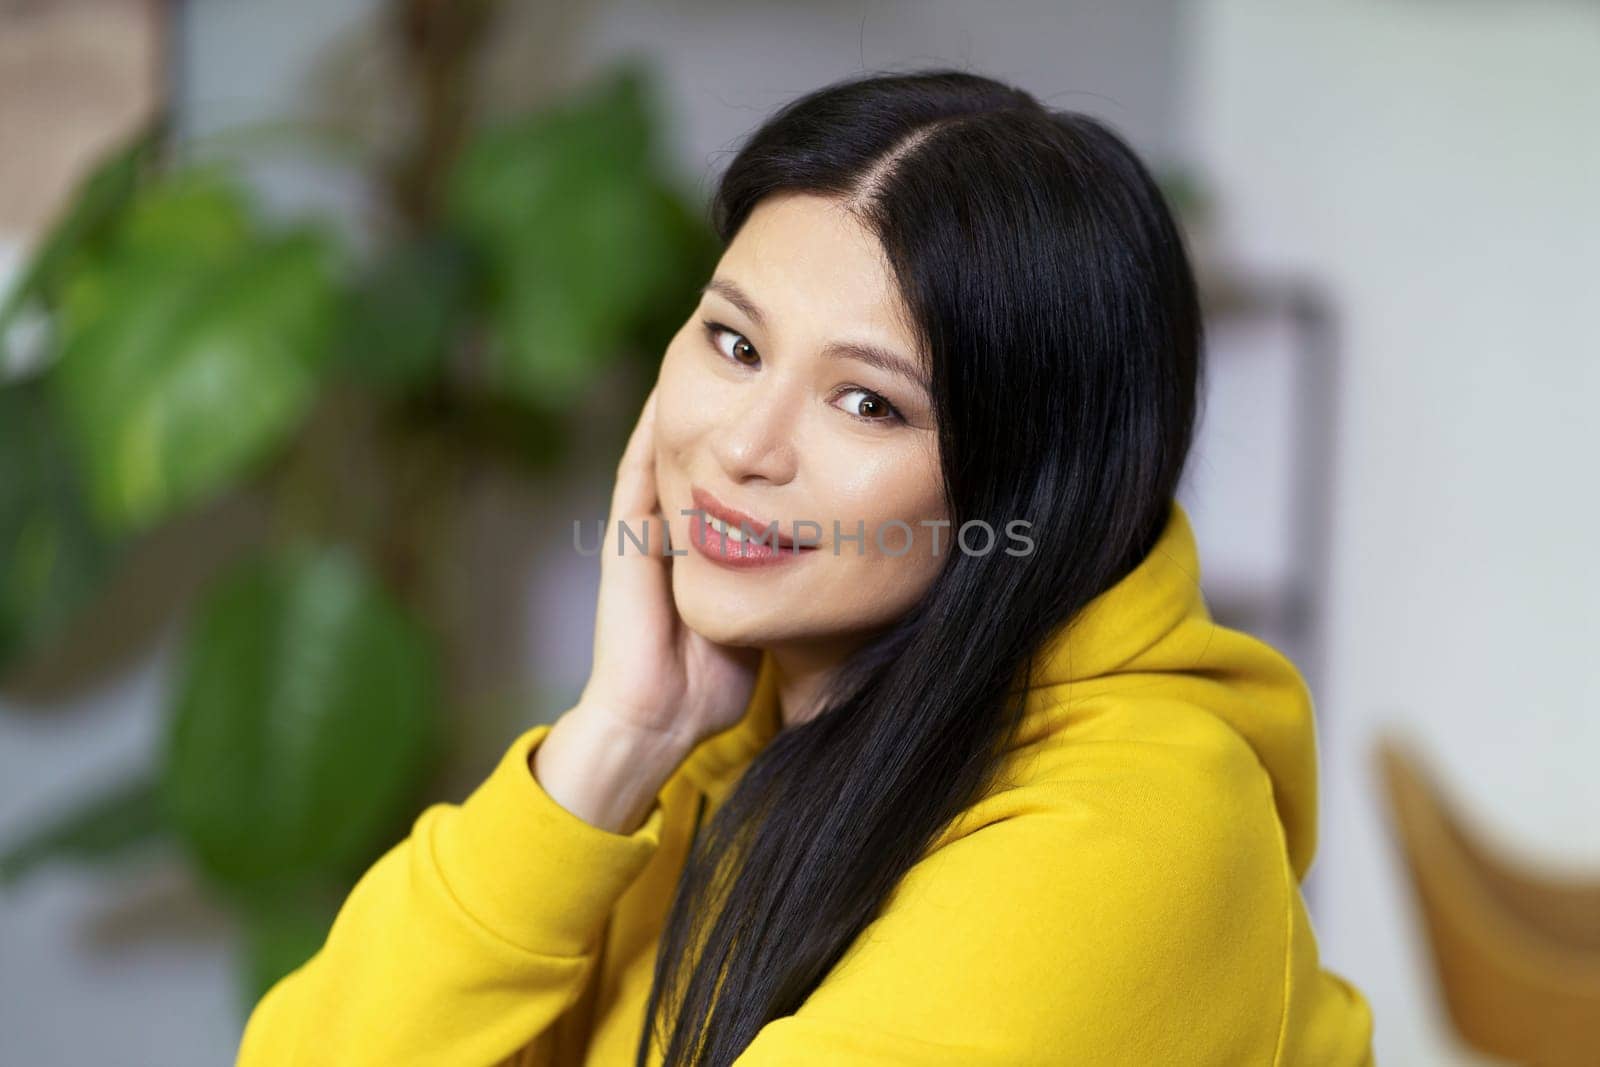 Pretty middle-aged Asian woman with healthy, glowing facial skin and well-groomed hair, promoting concept of healthy lifestyle. Woman radiates confidence, vitality, and well-being, in harmony with nature and her surroundings. by LipikStockMedia